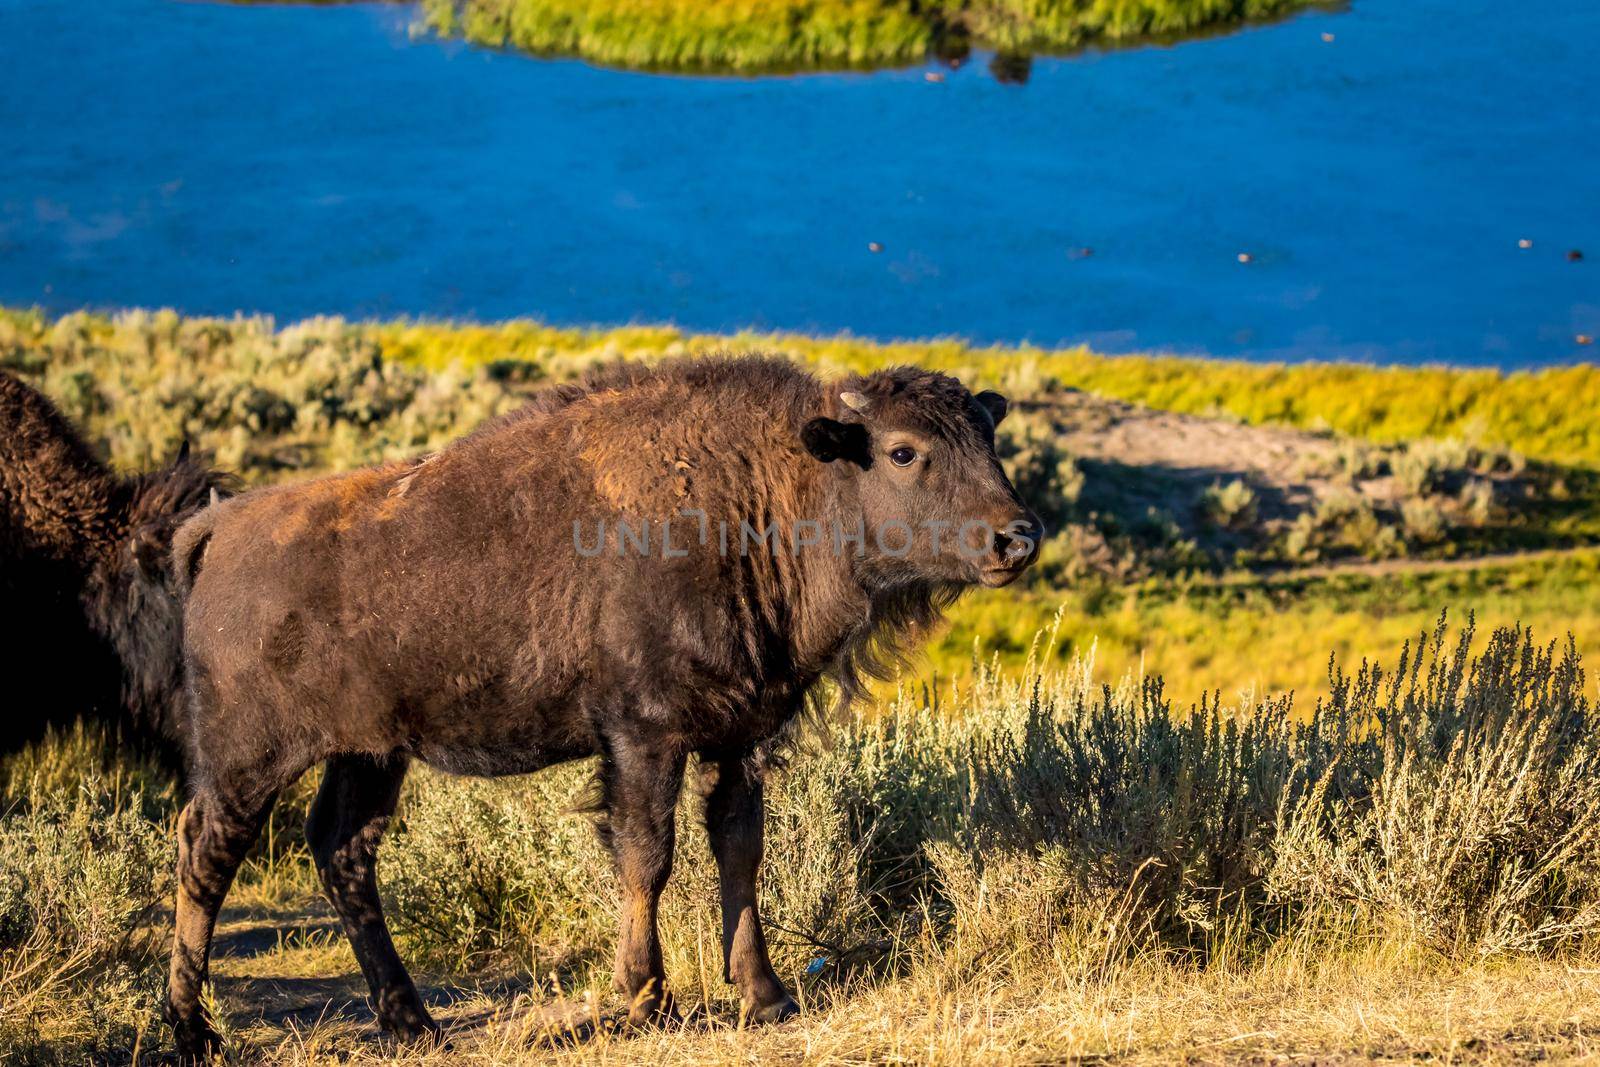 Wild Bison calf at Yellowstone by gepeng